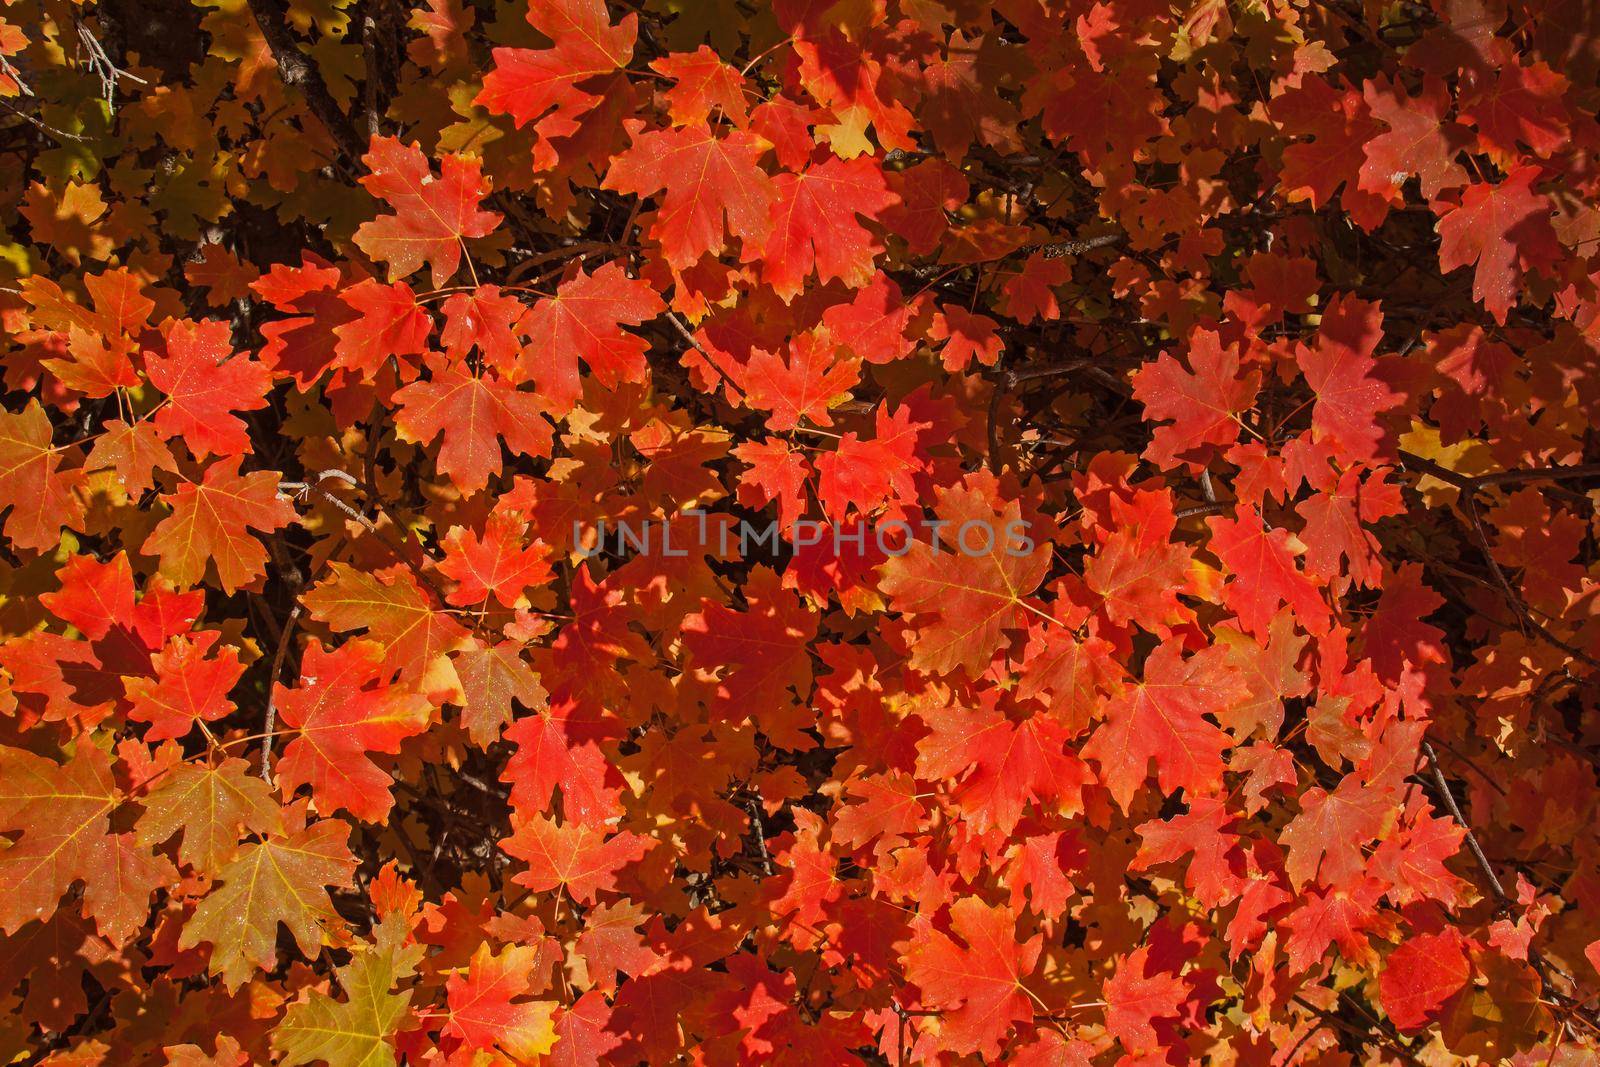 Bright Fall leaves 2628 by kobus_peche